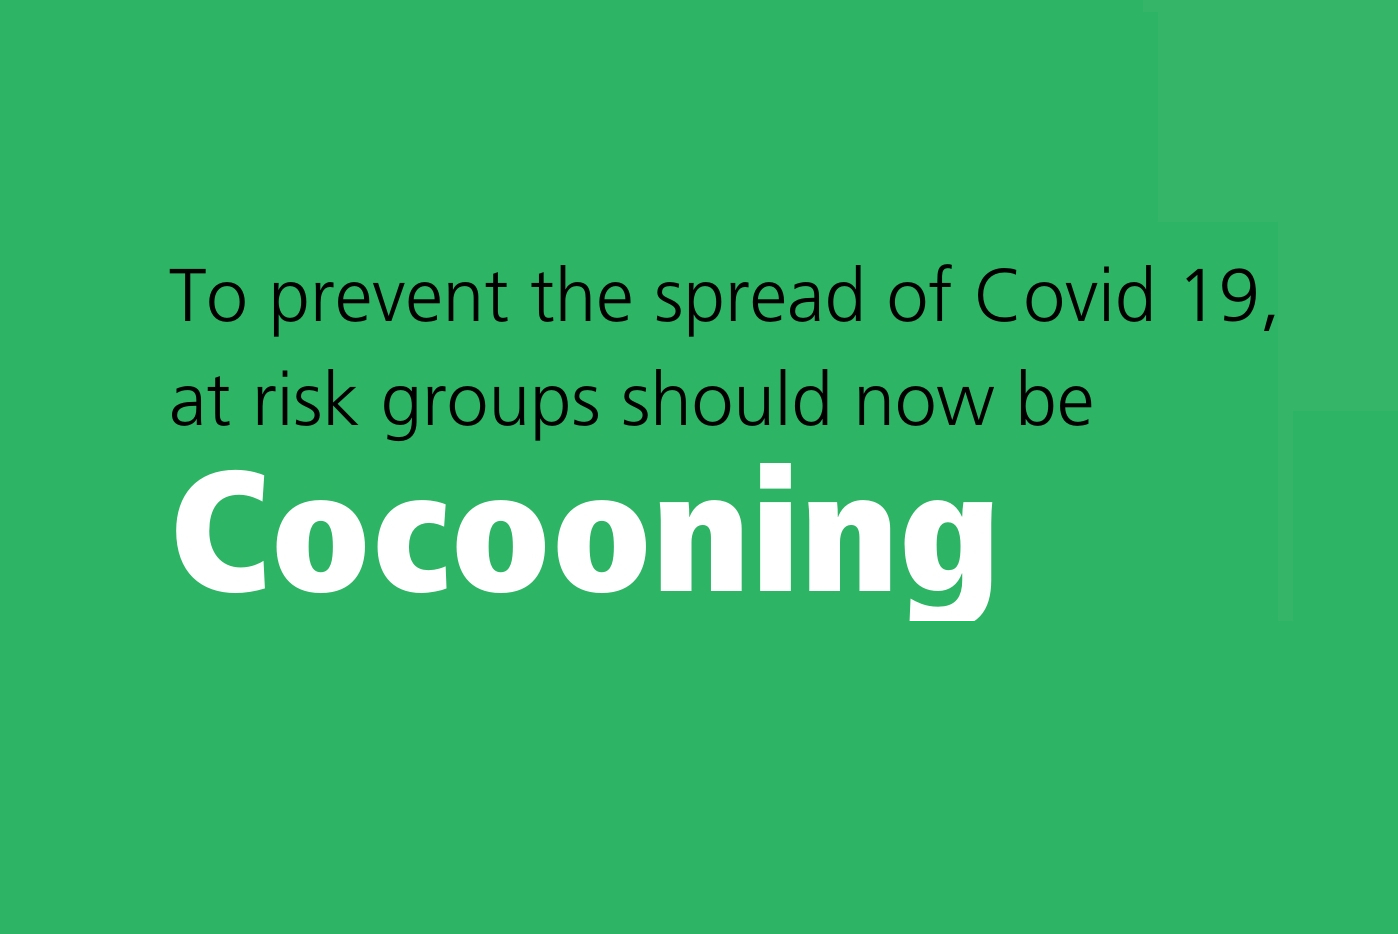 Guidelines on cocooning during COVID-19